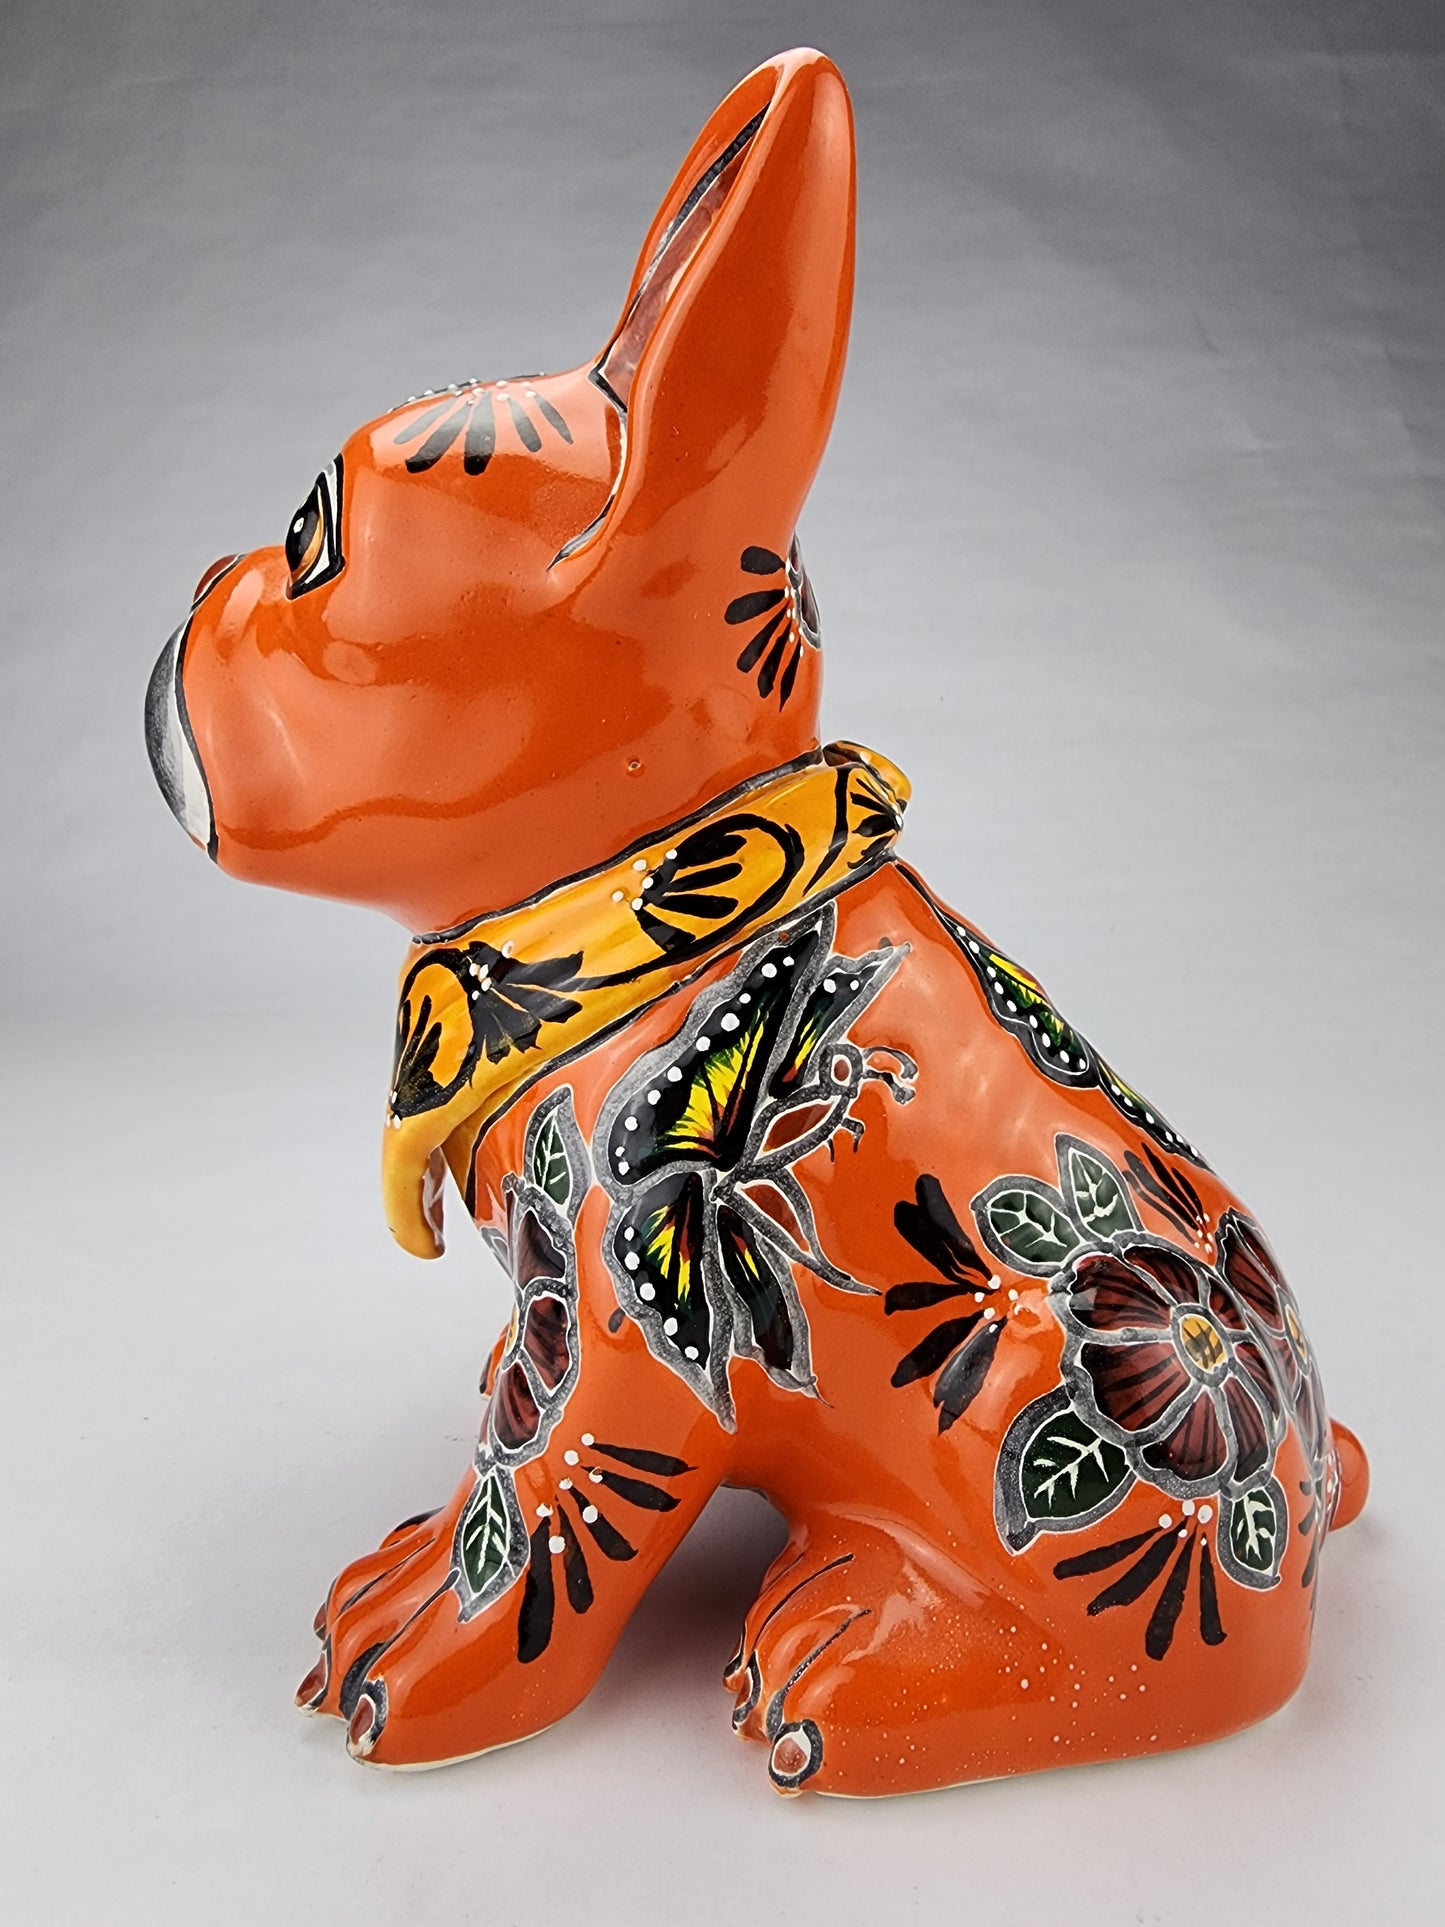 Frenchie Bulldog Hand Painted Ceramic Mexican Pottery ORG